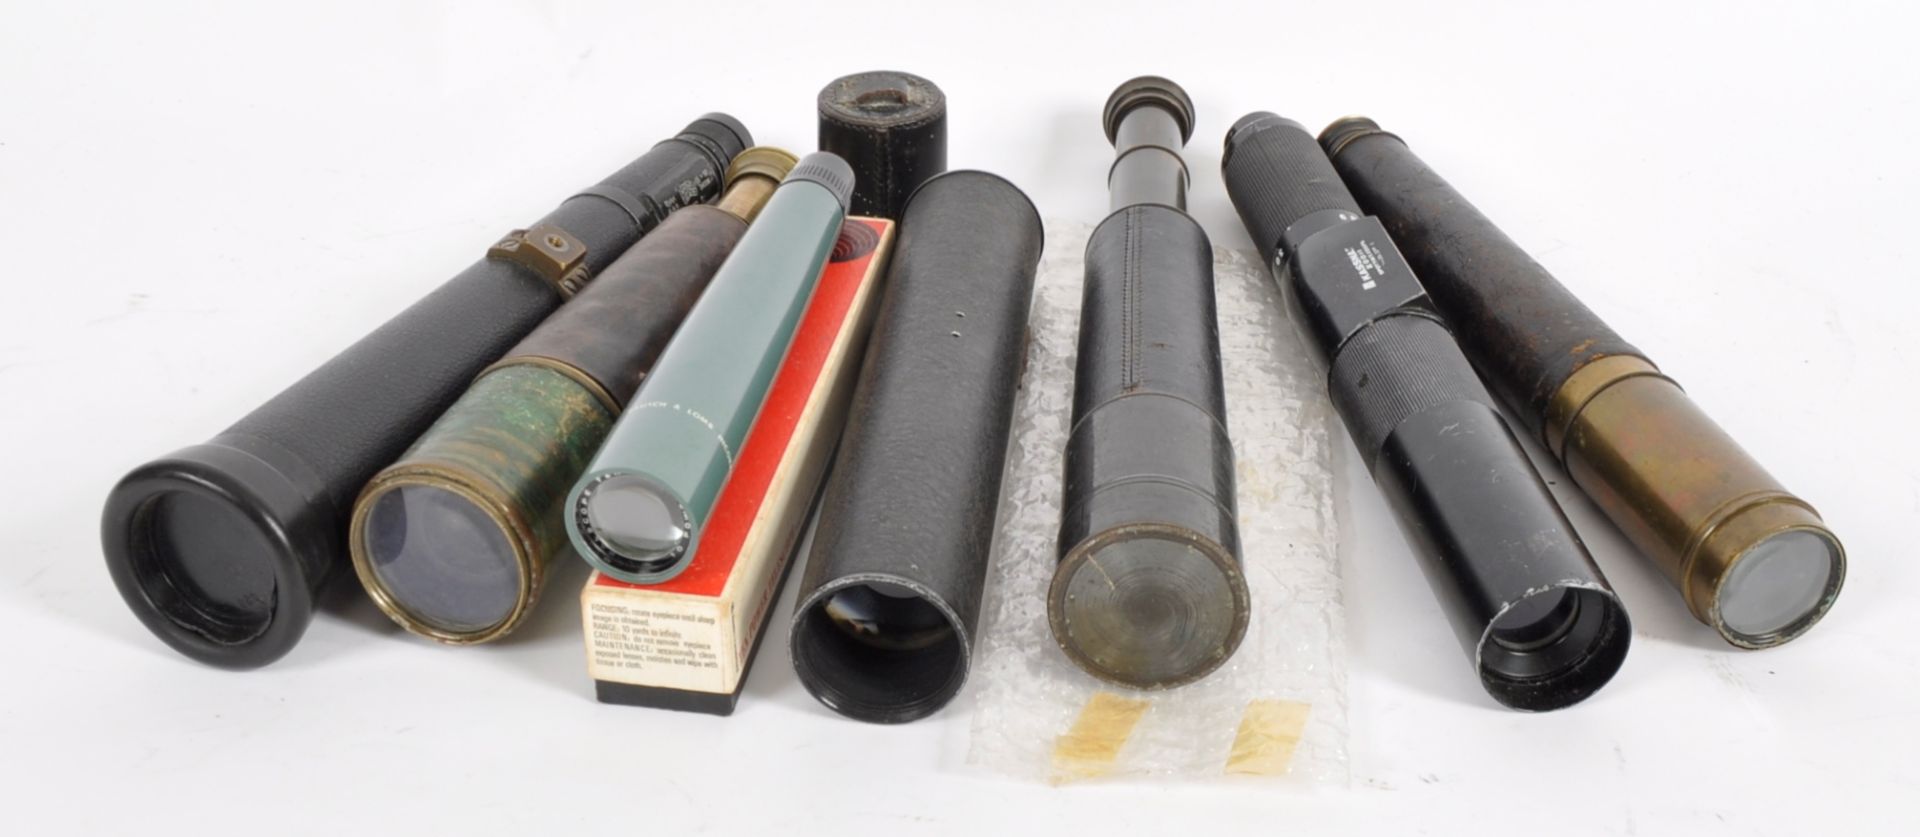 COLLECTION OF VINTAGE TELESCOPES & SPOTTING SCOPES